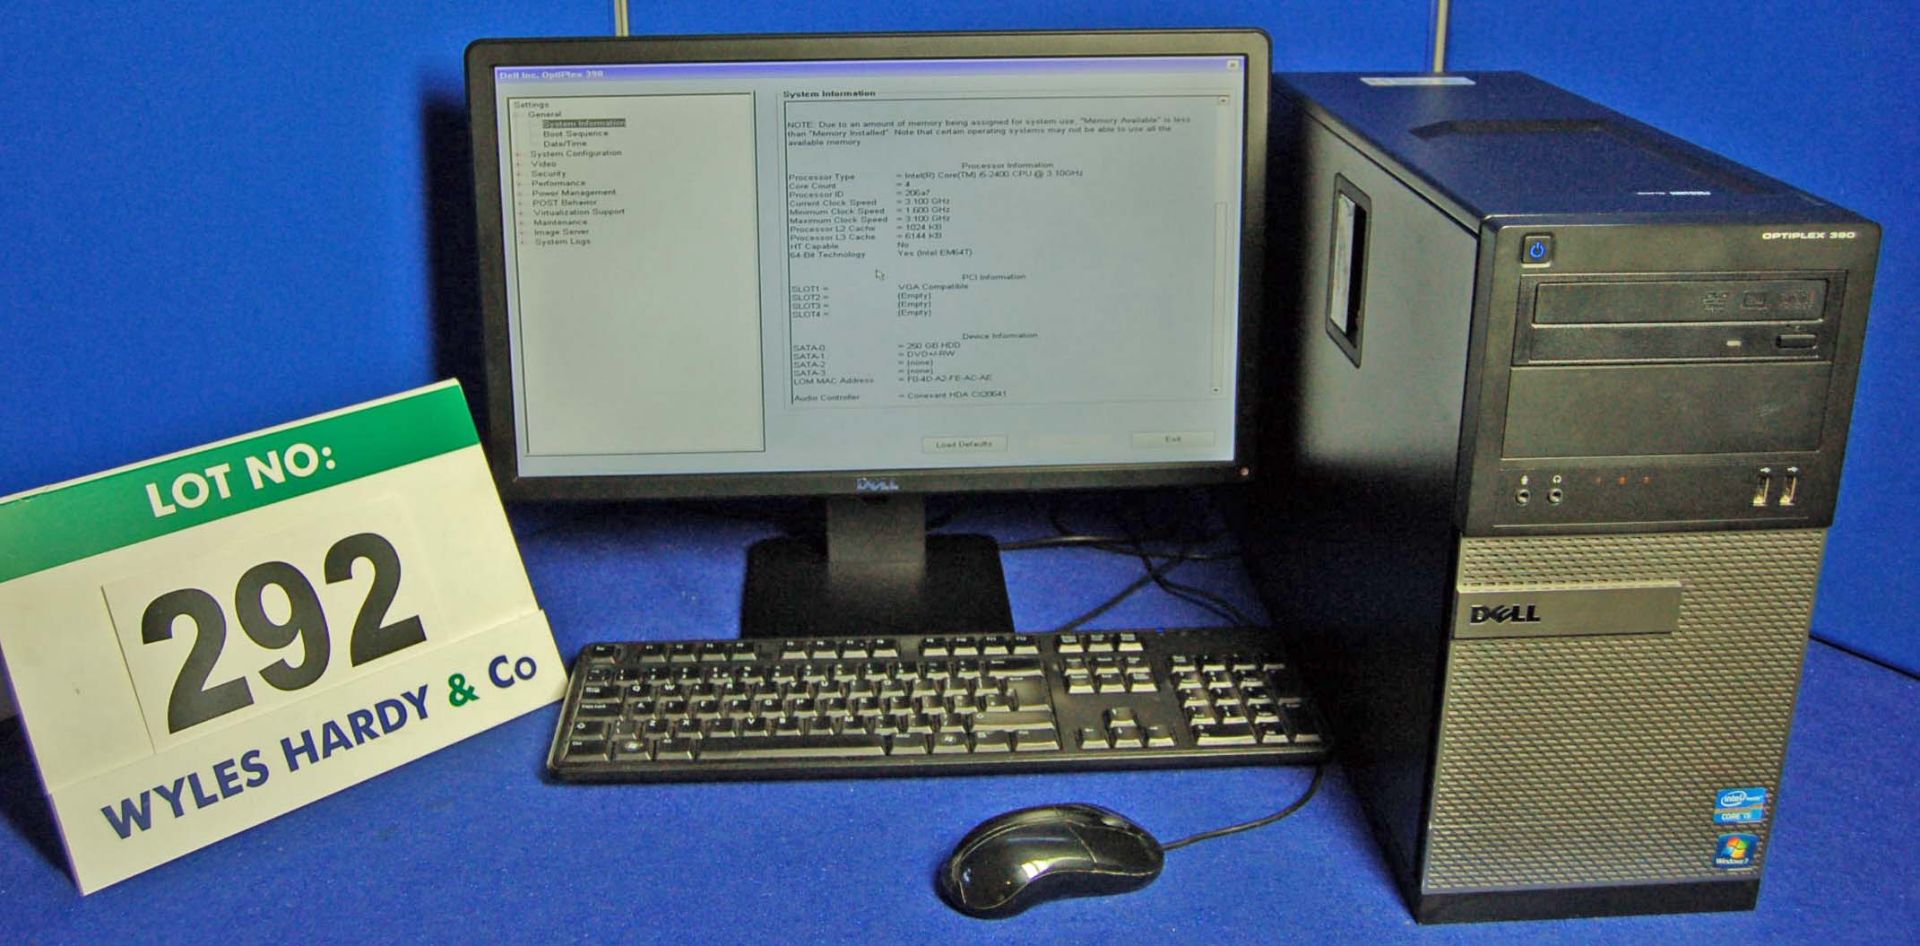 A DELL OptiPlex 390 INTEL Core i5 3.1Ghz Minitower Personal Computer with 250GB Hard Disc Drive, 8.